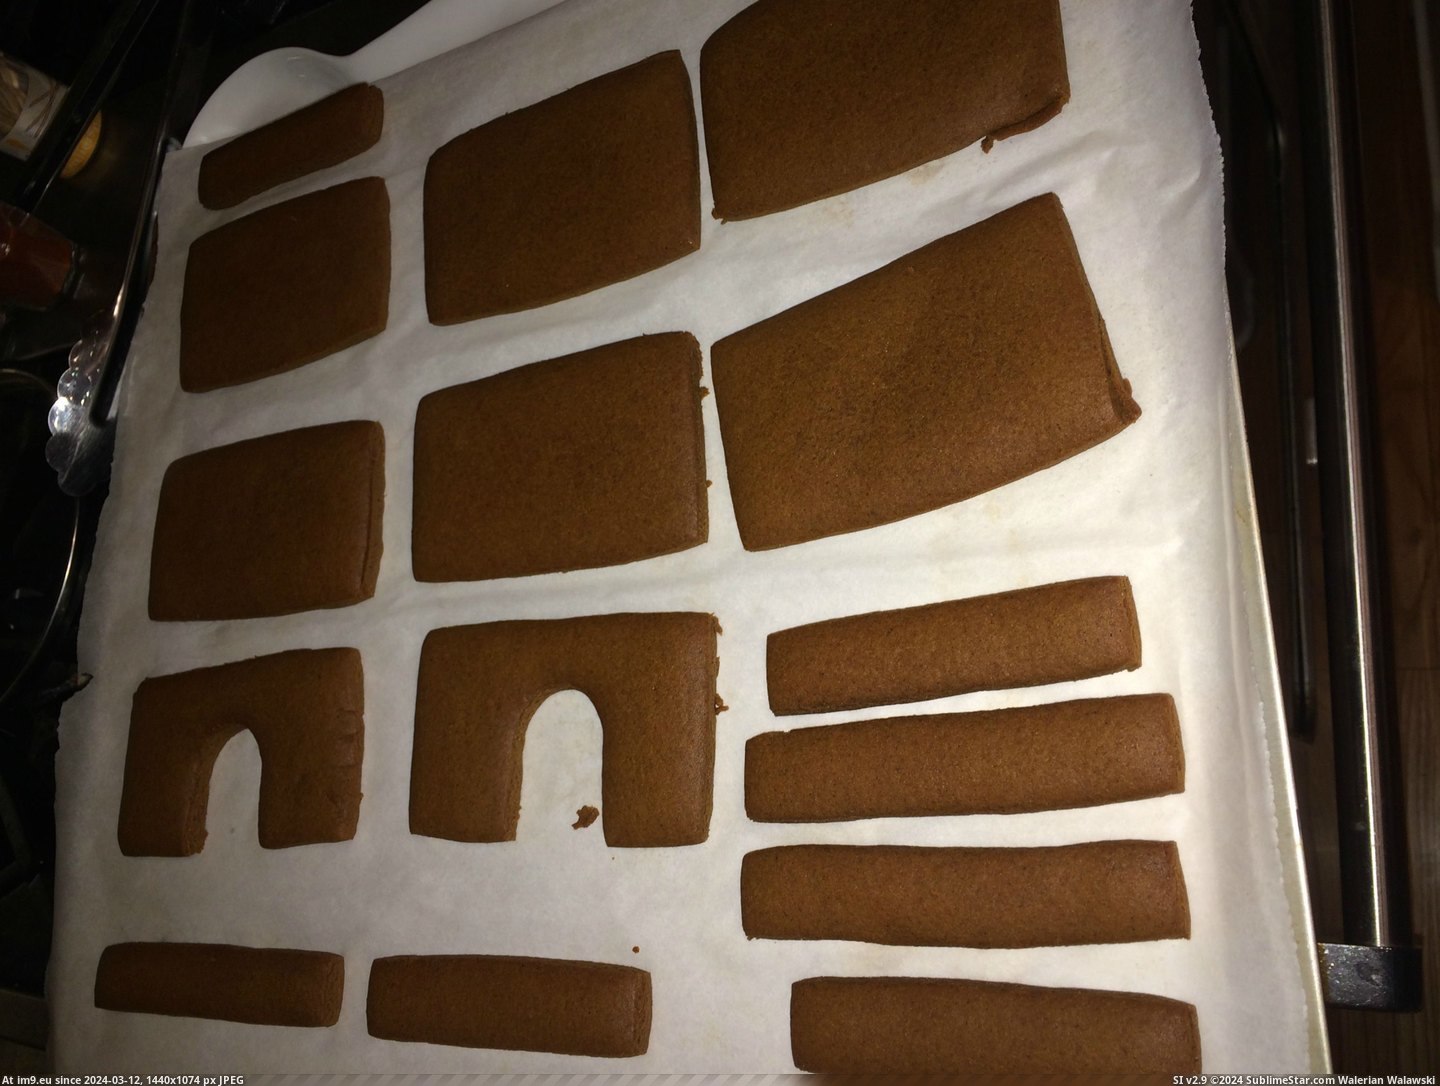 #Husband #Get #Our #Divorced #Collaborated #Project #Gingerbread #Success [Pics] My husband and I collaborated on our first gingerbread project and didn't get divorced...success! 8 Pic. (Obraz z album My r/PICS favs))